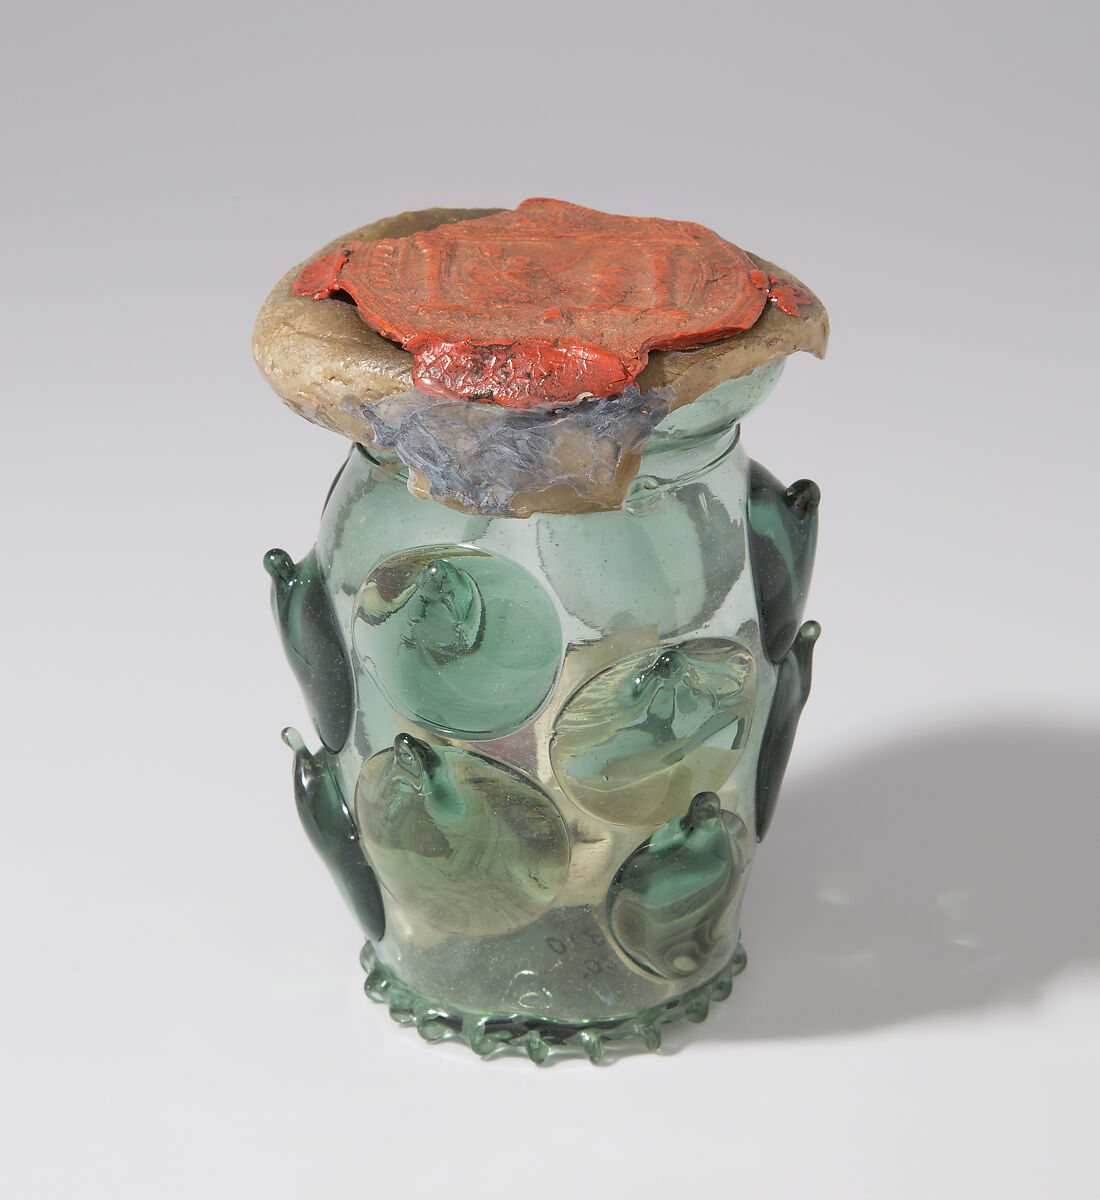 Reliquary Beaker (Krautstrunk), Free-blown glass with applied decoration; wax, silk, linen, ink on vellum, and possible human remains, German 